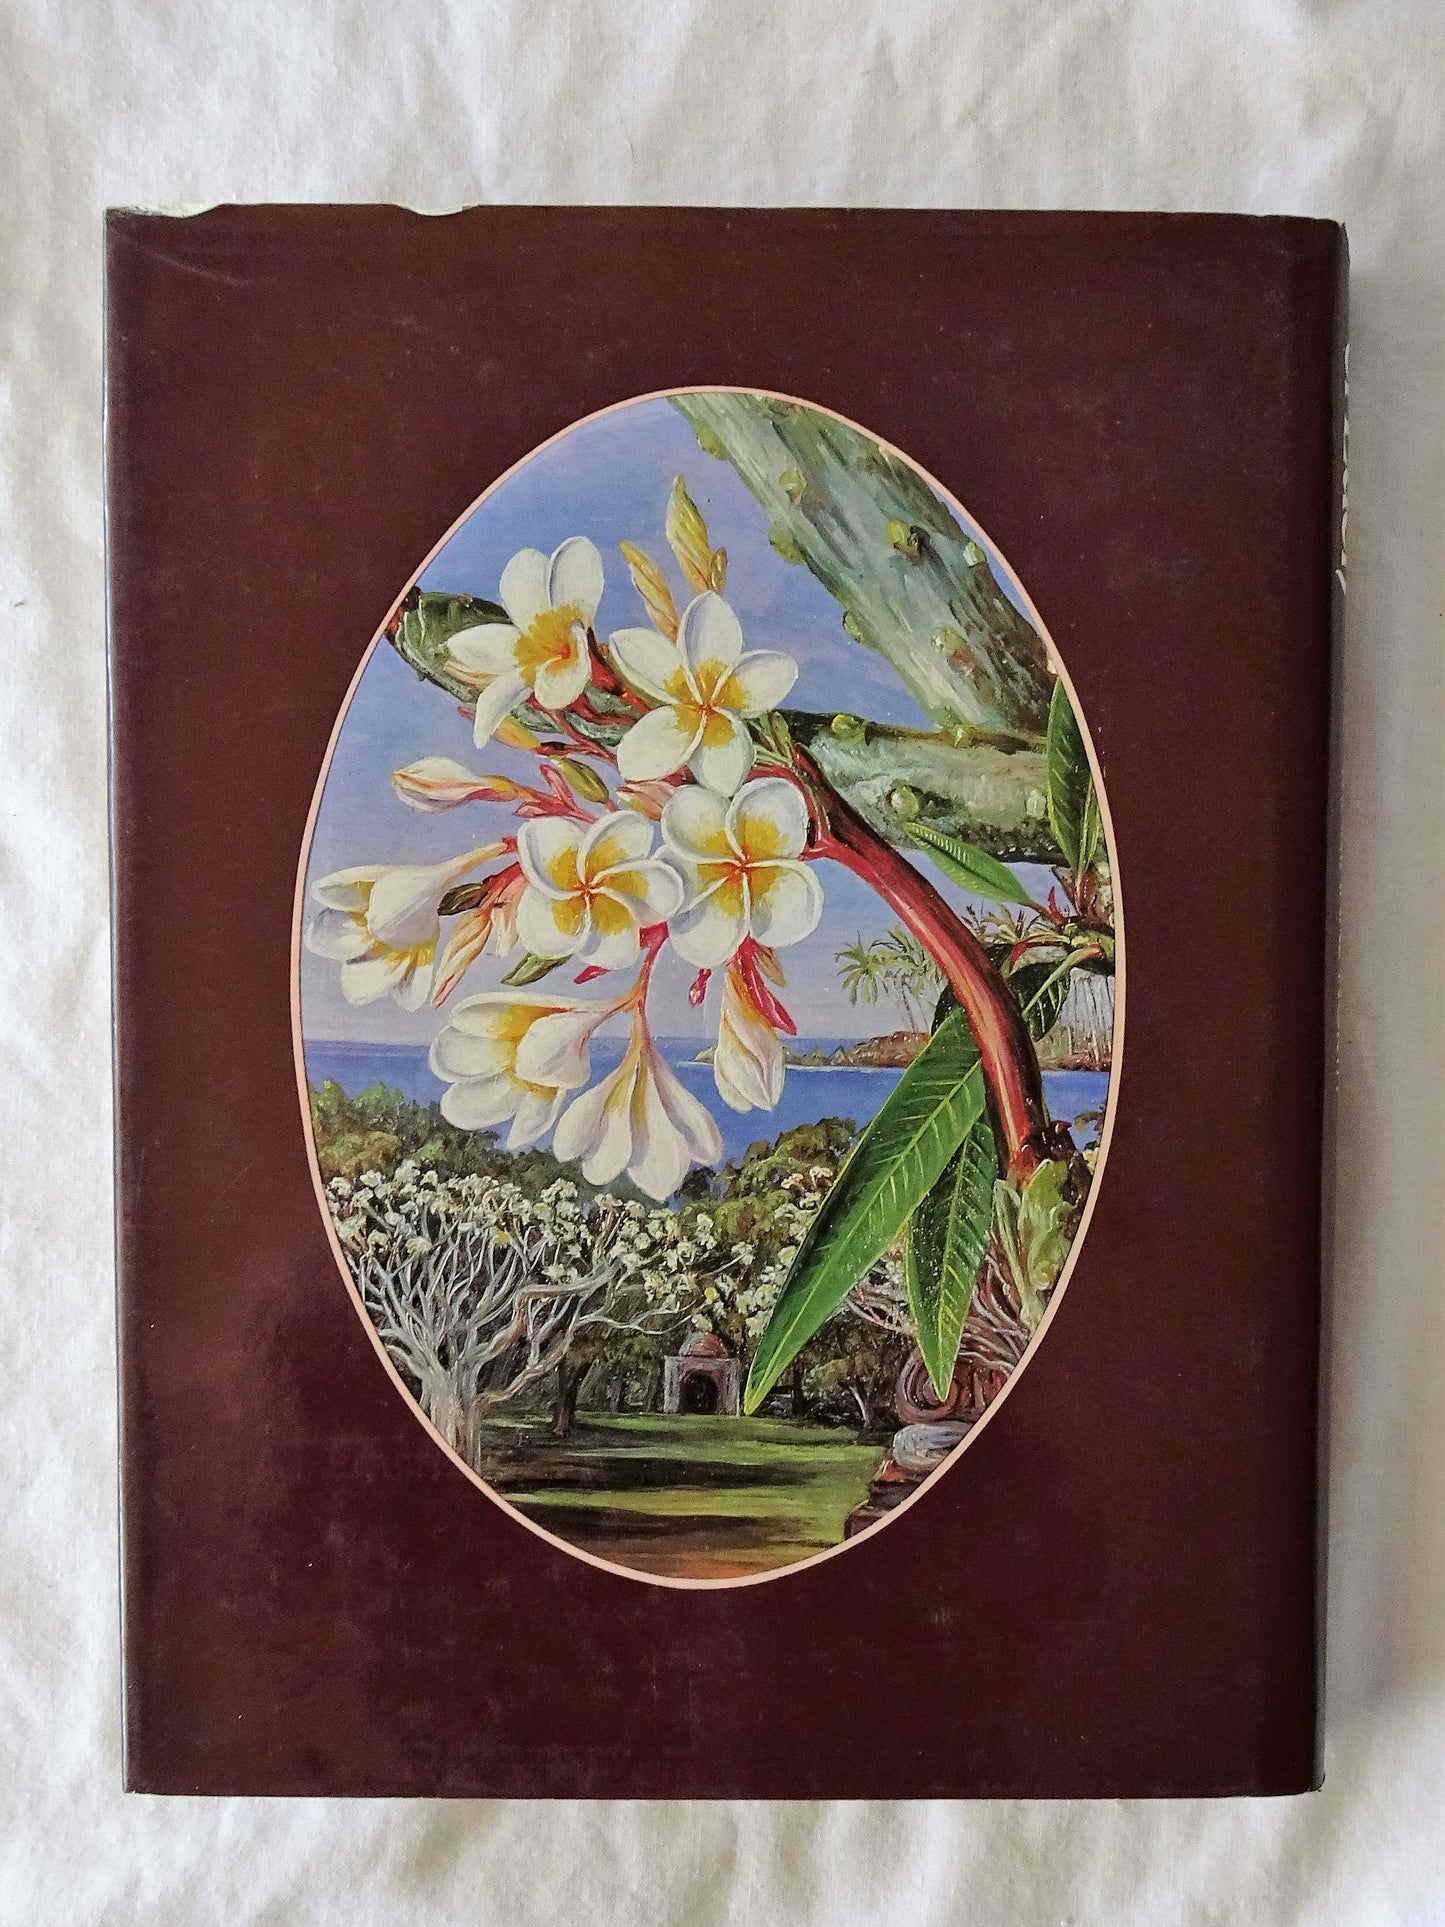 A Vision of Eden by Marianne North